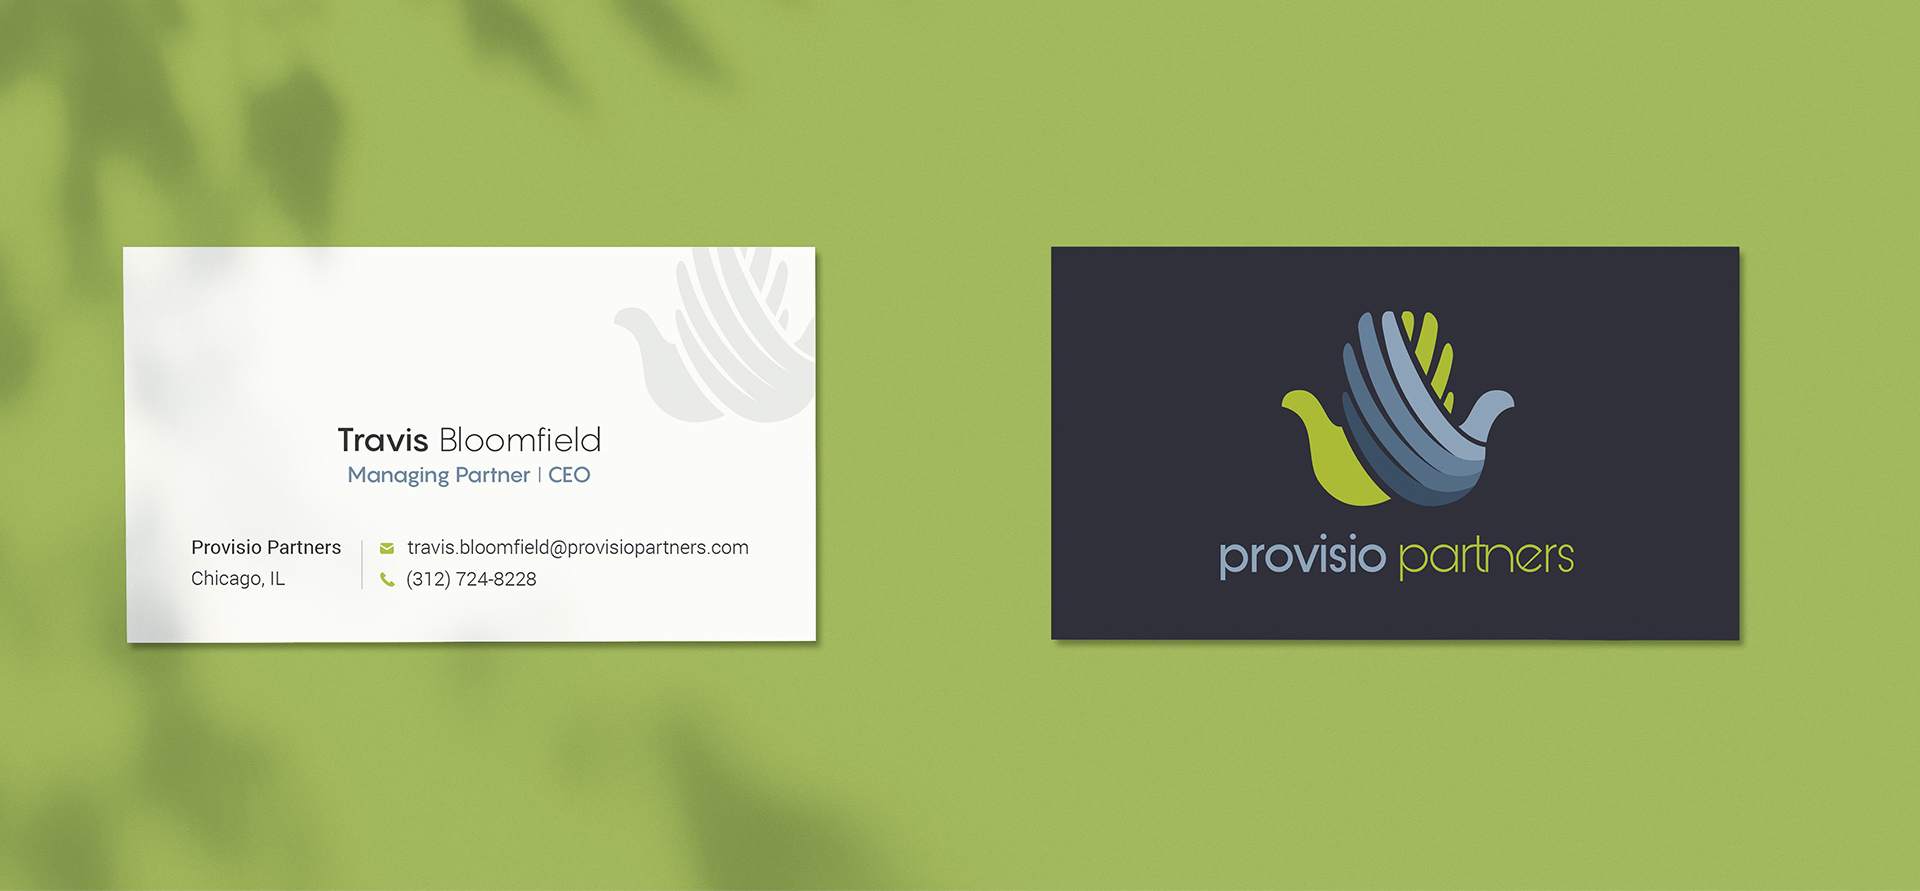 Provisio Partners business cards2